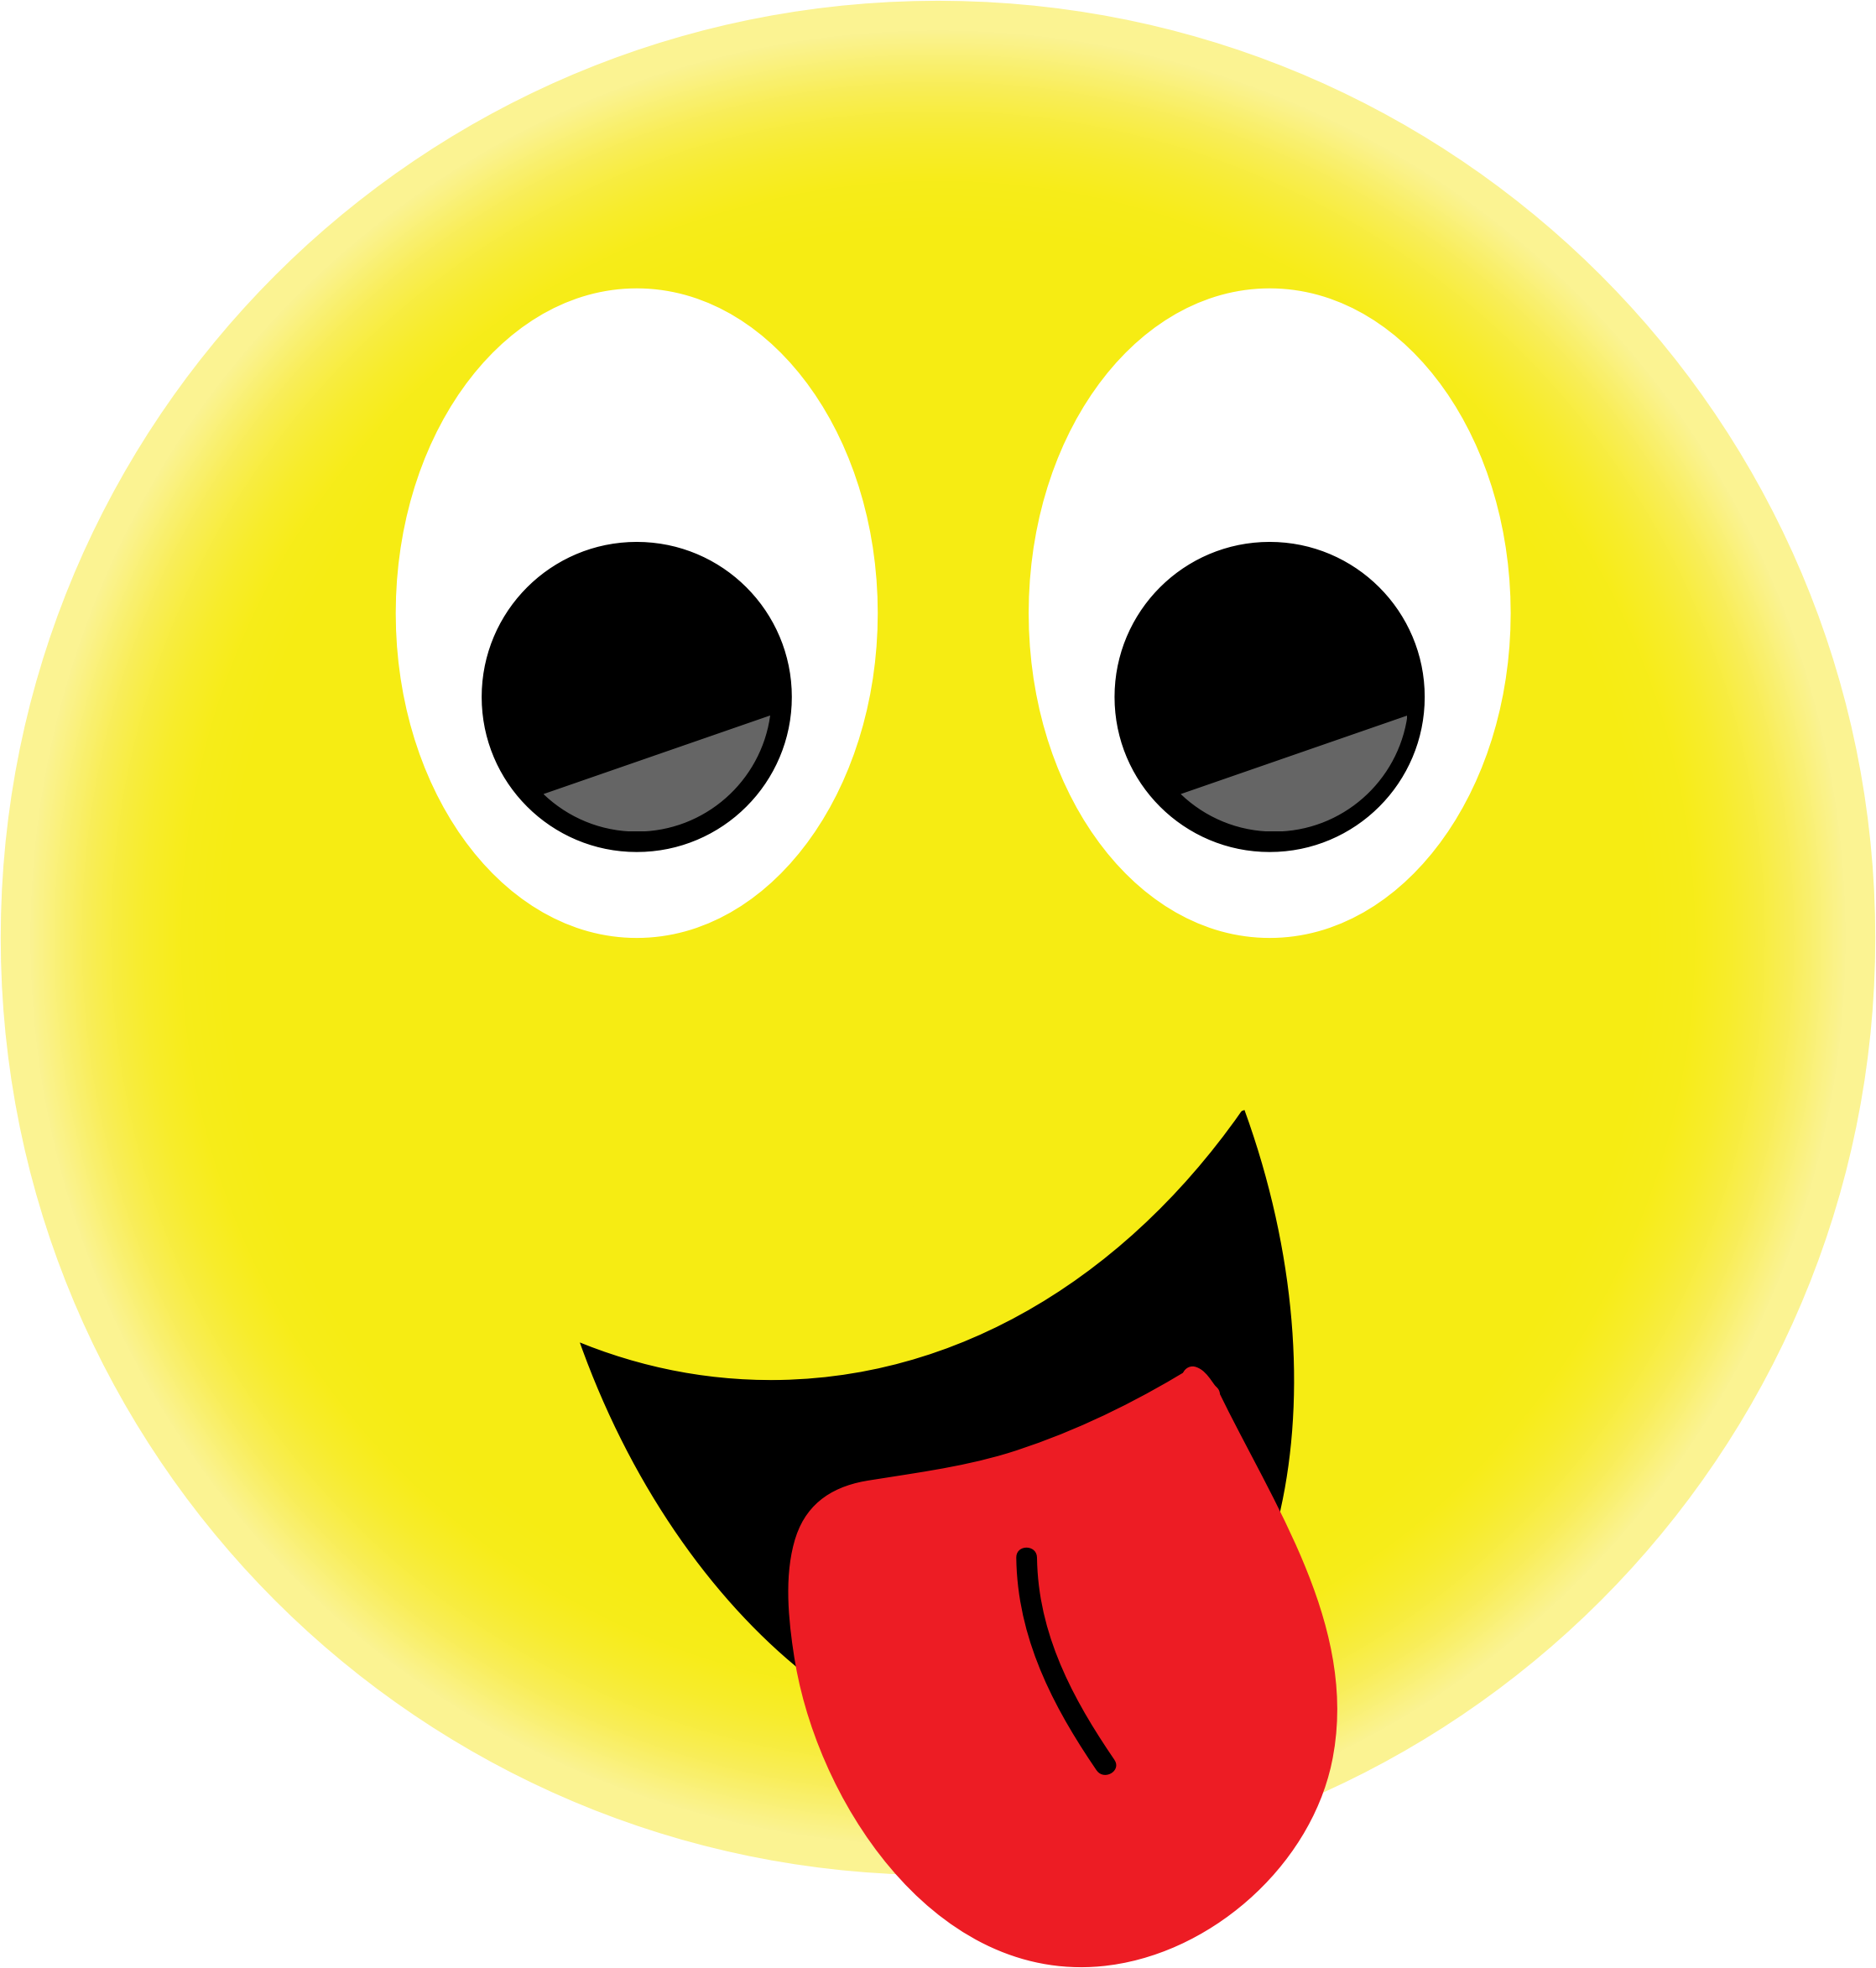 Smiley Face With Tongue Out Clipart